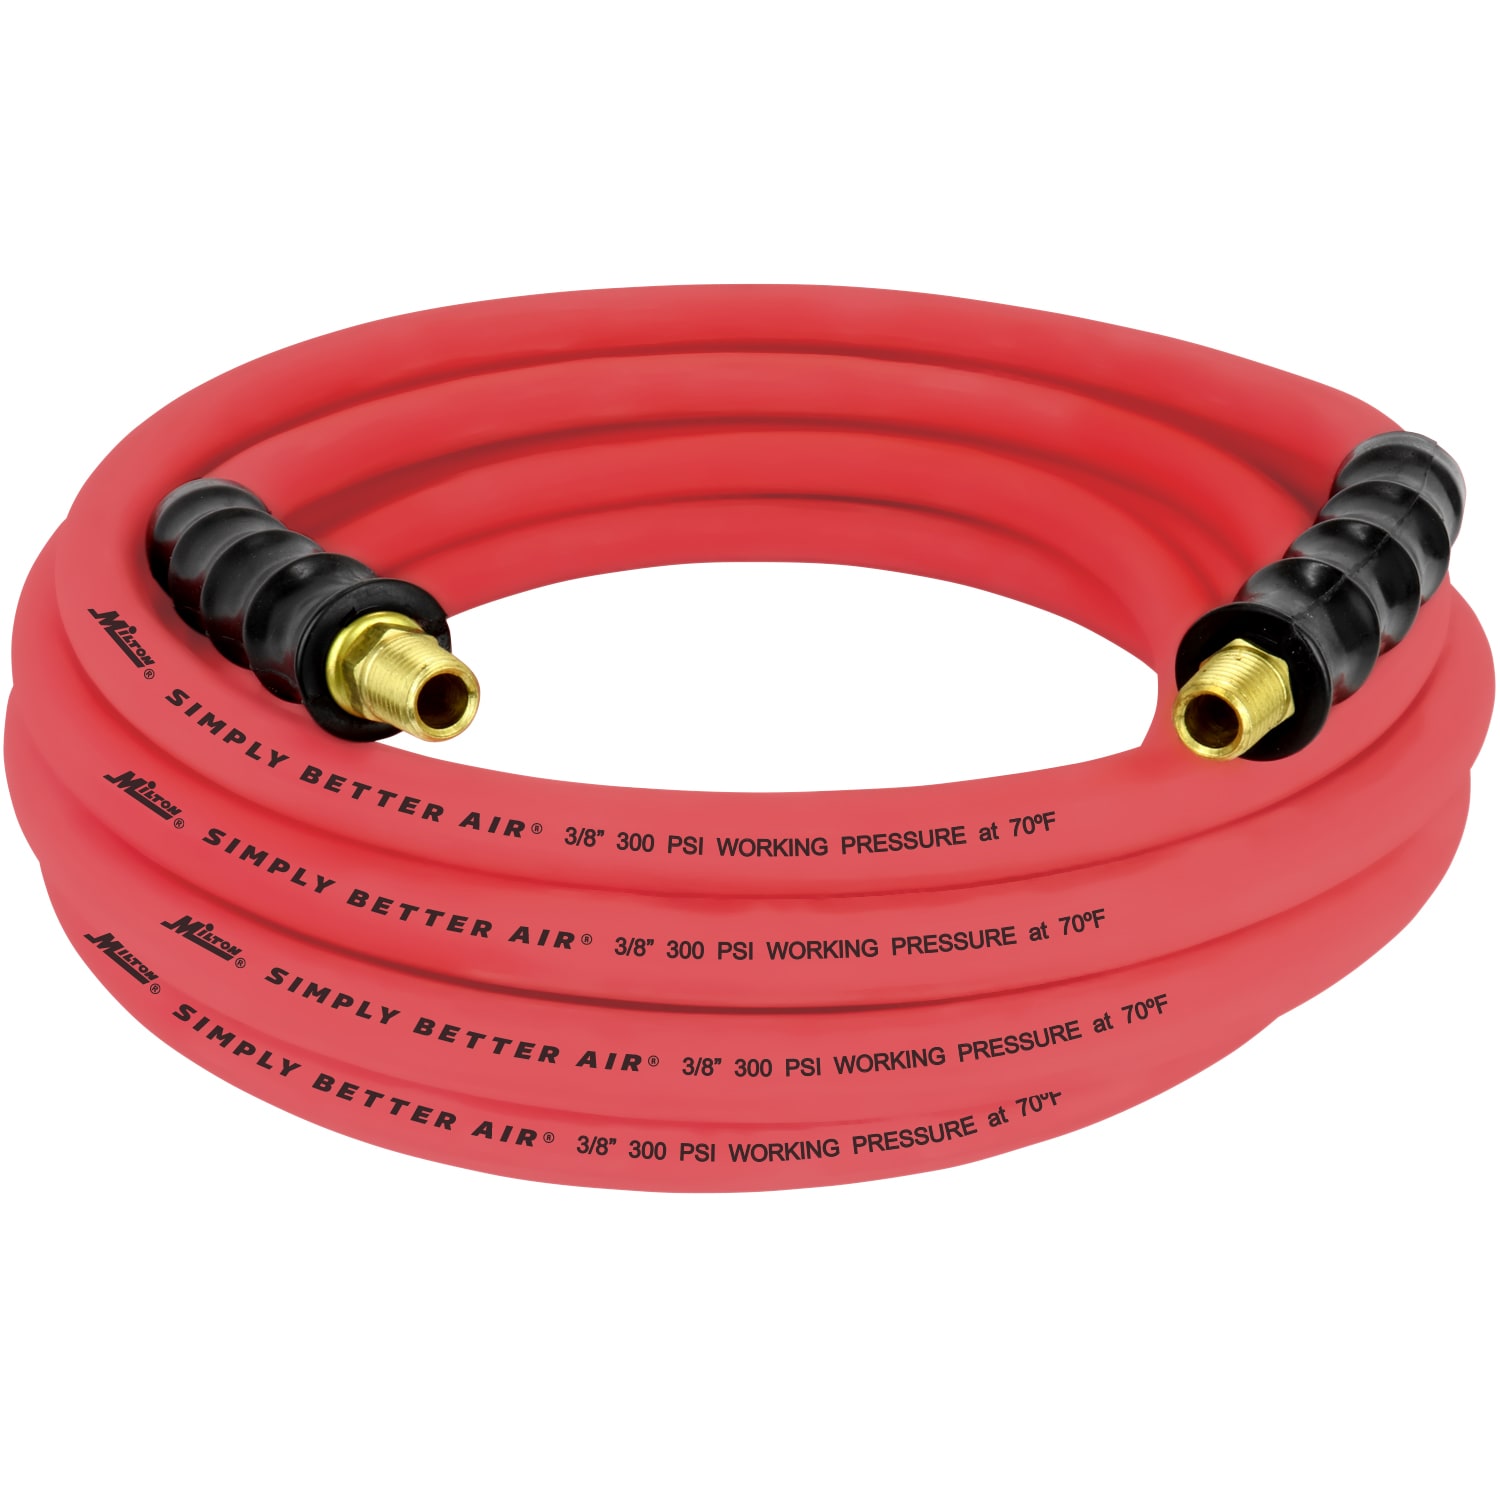 Air Hose 25 ft ID Flexible Compressor Garage National Pipe Thread x 3/8 in 